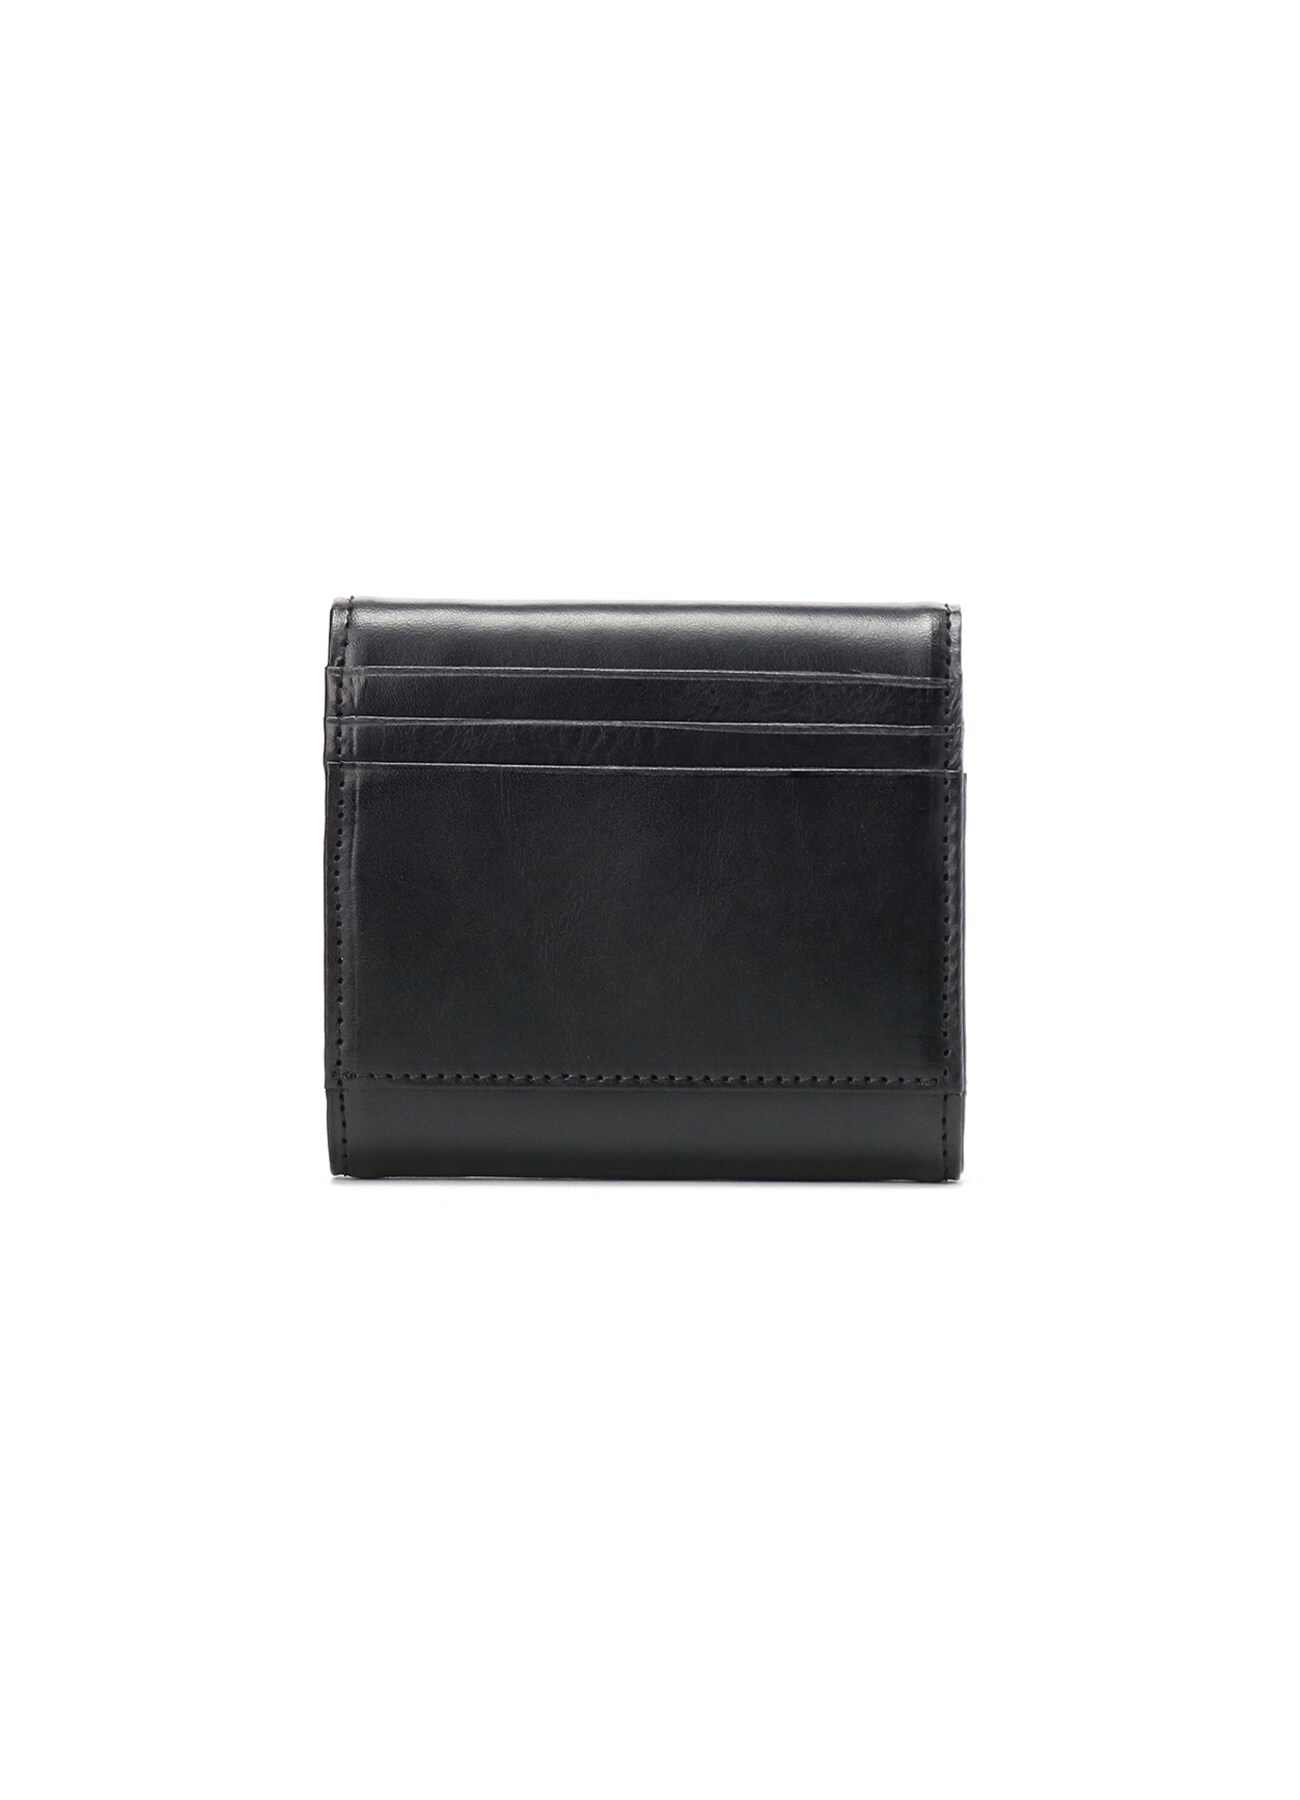 SMOOTH LEATHER MINI FOLDED CLAPS WALLET